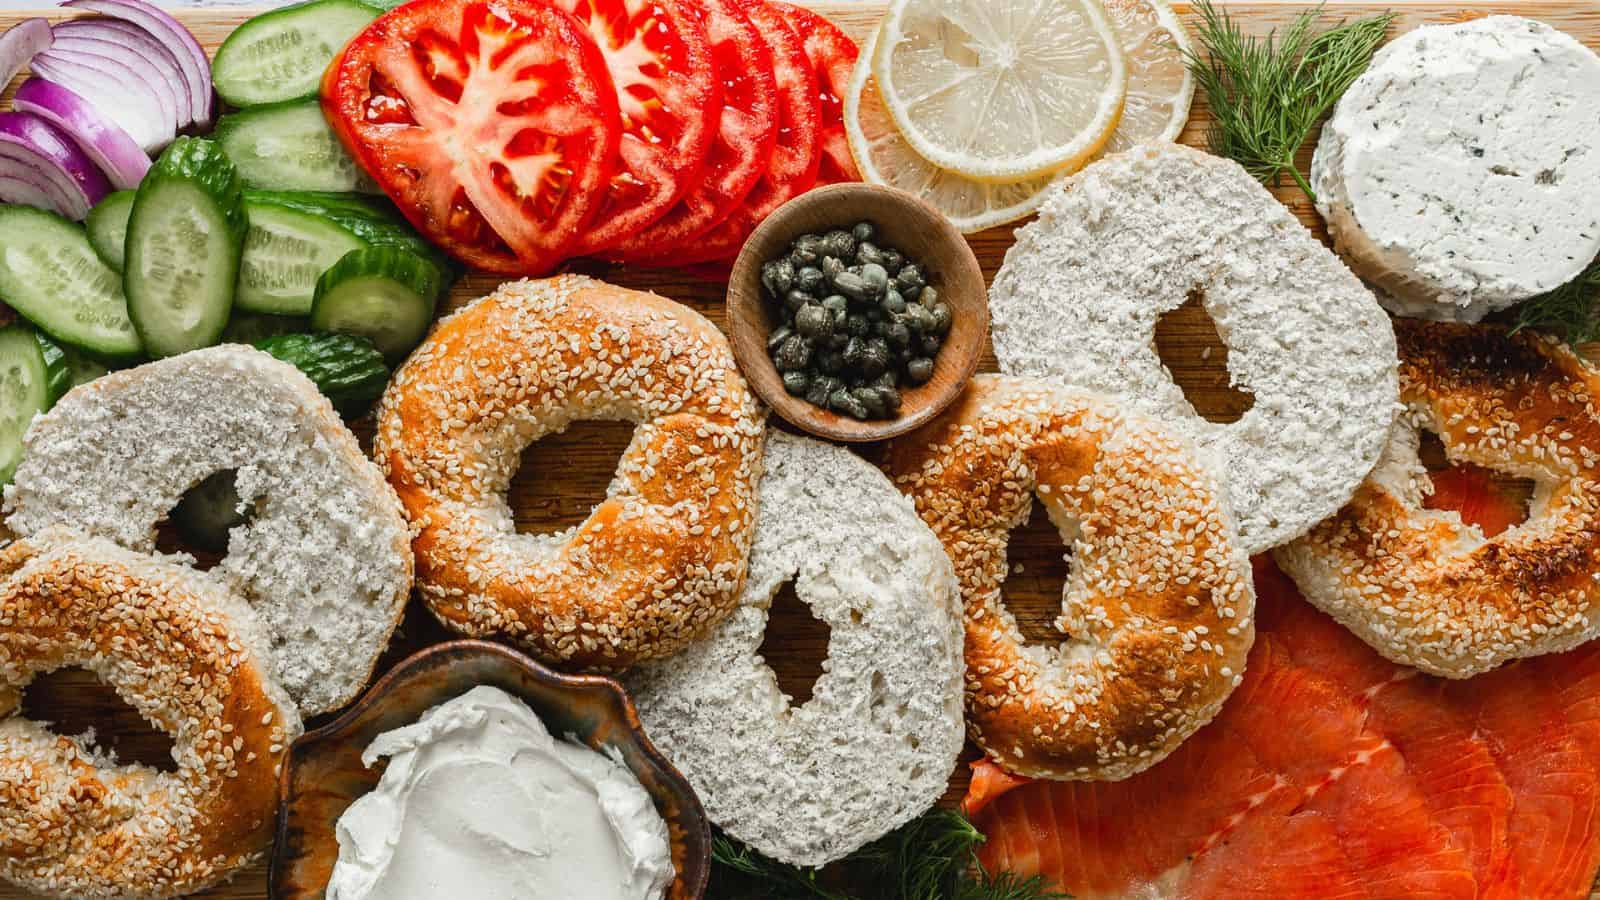 Lox and bagel board.